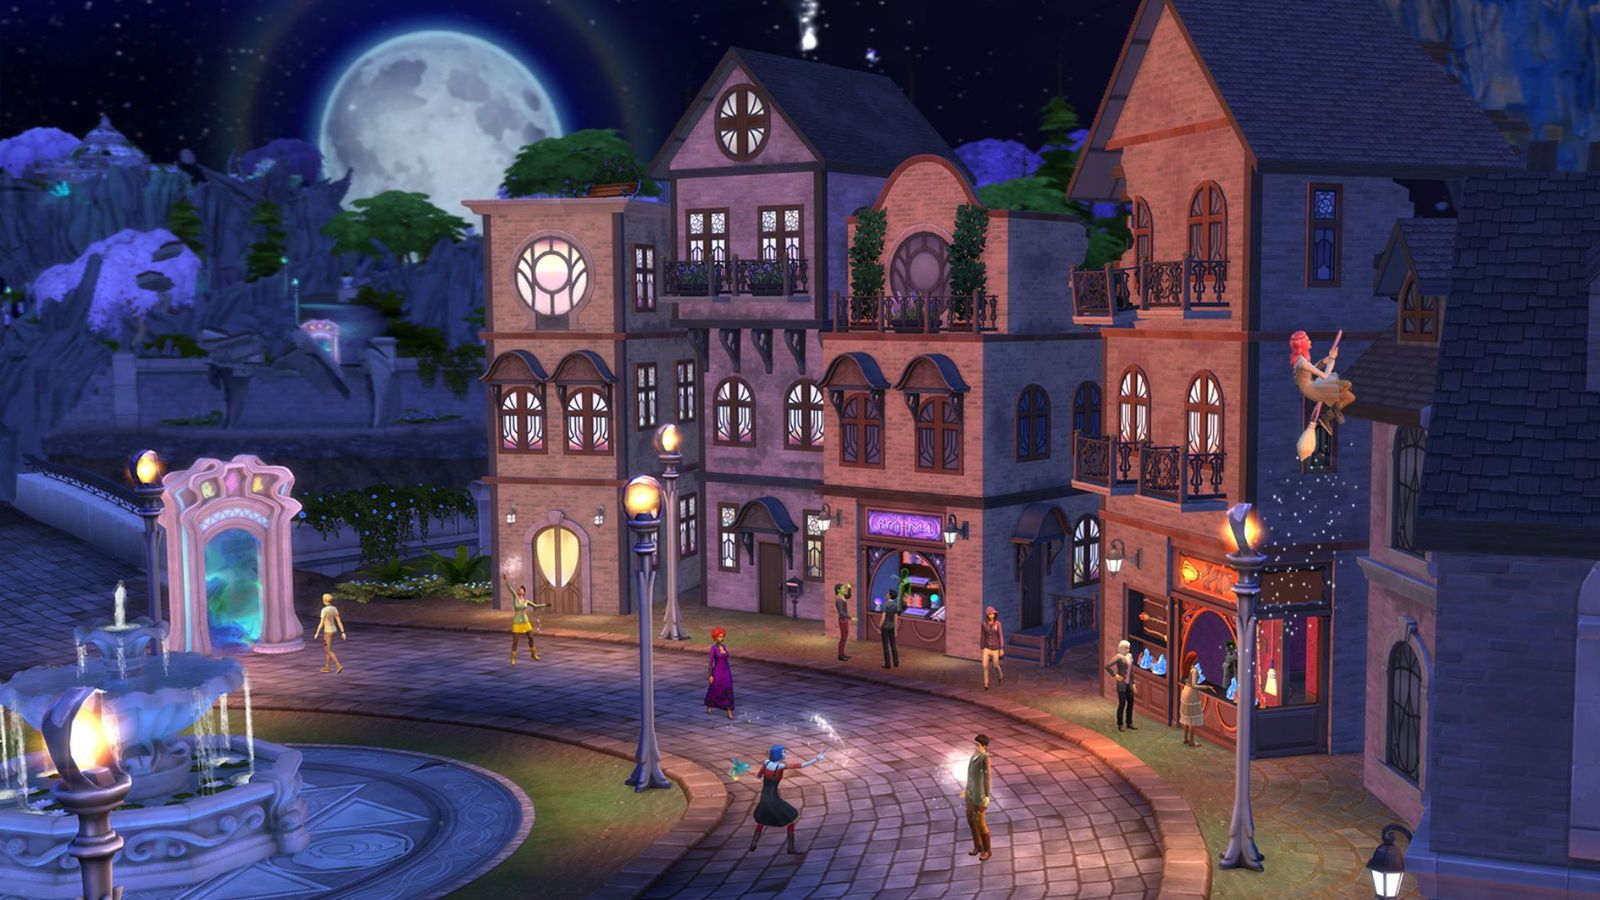 The main magical town in Realm of Magic